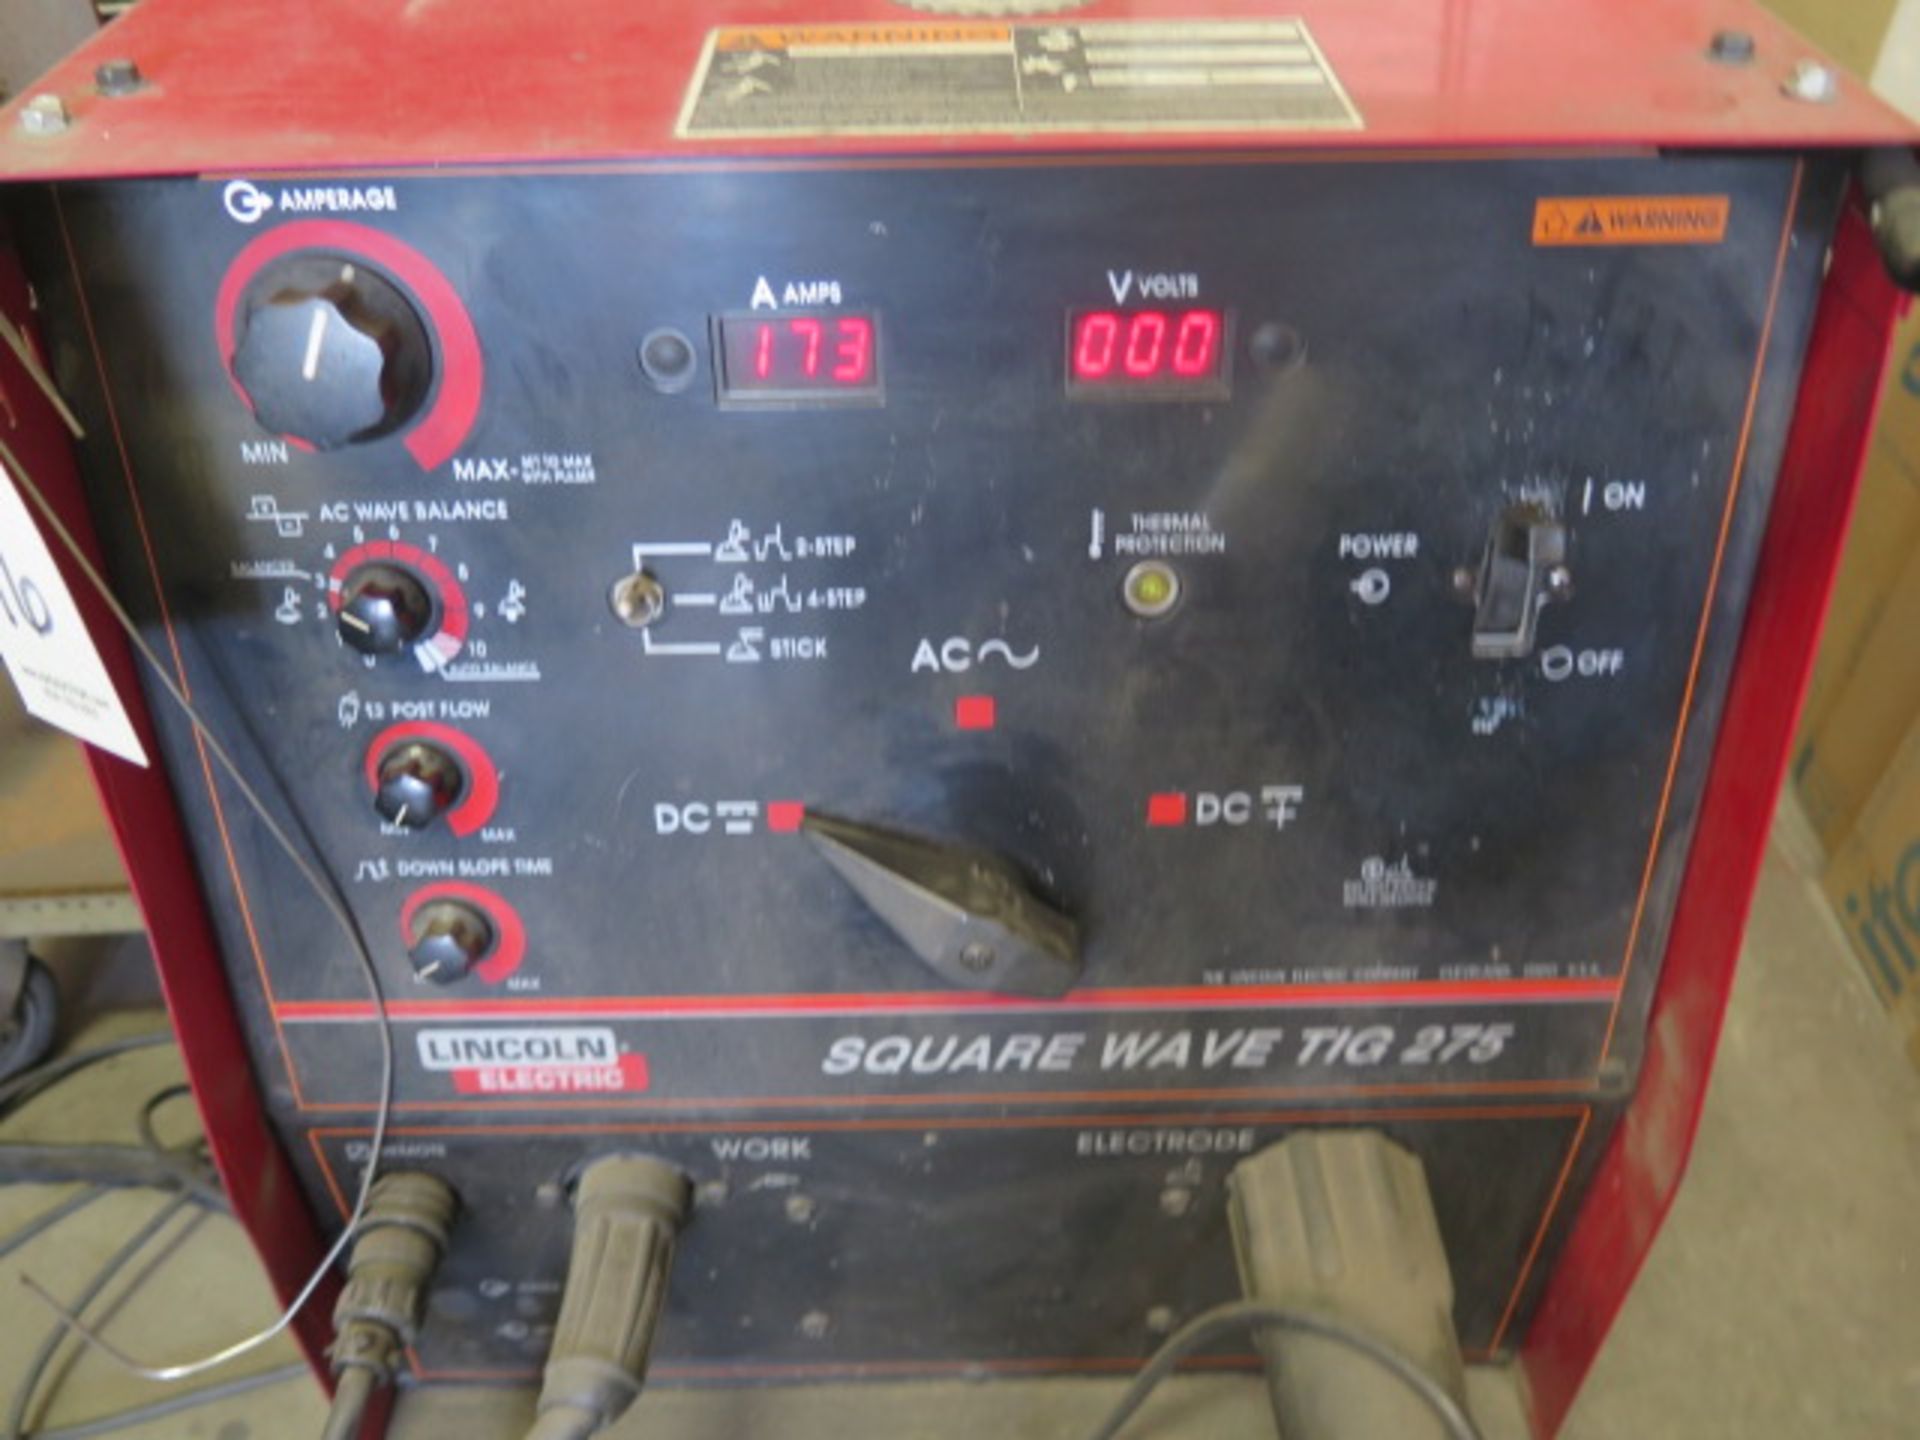 Lincoln Square Wave TIG 275 Arc Welding Power Source s/n U1000700257 w/ Lincoln Cooling System - Image 4 of 5